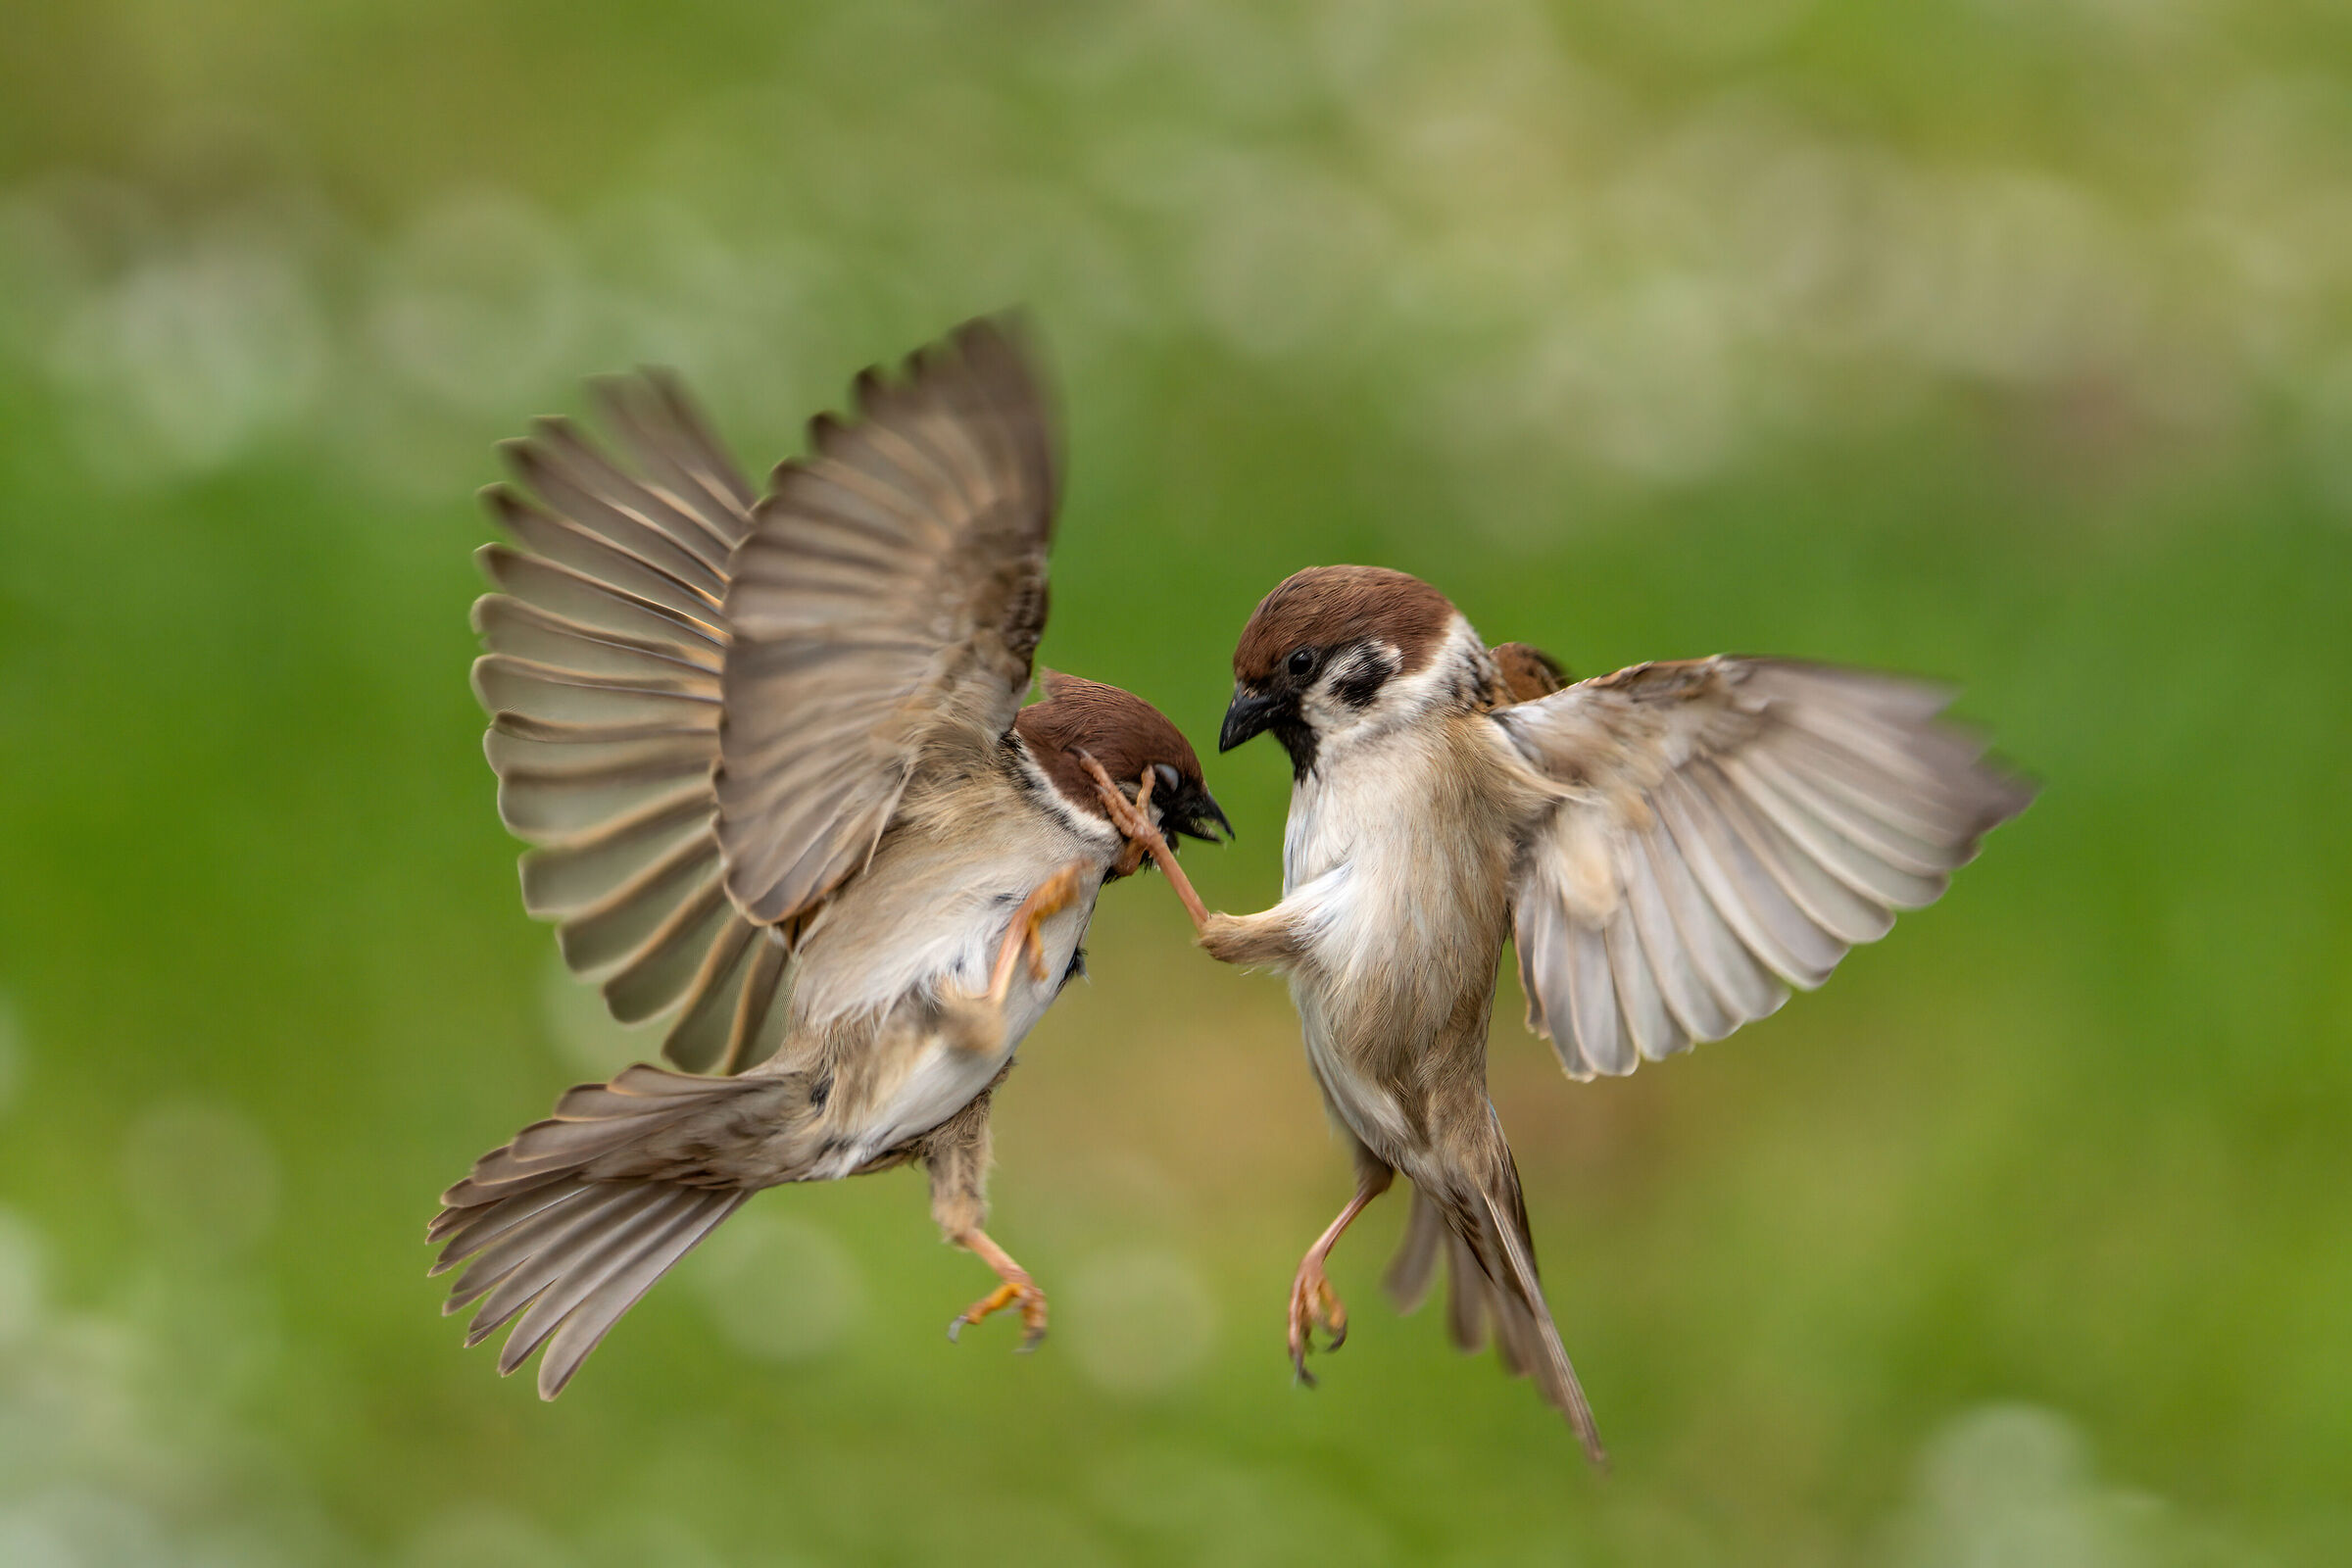 Sparrows fighting...